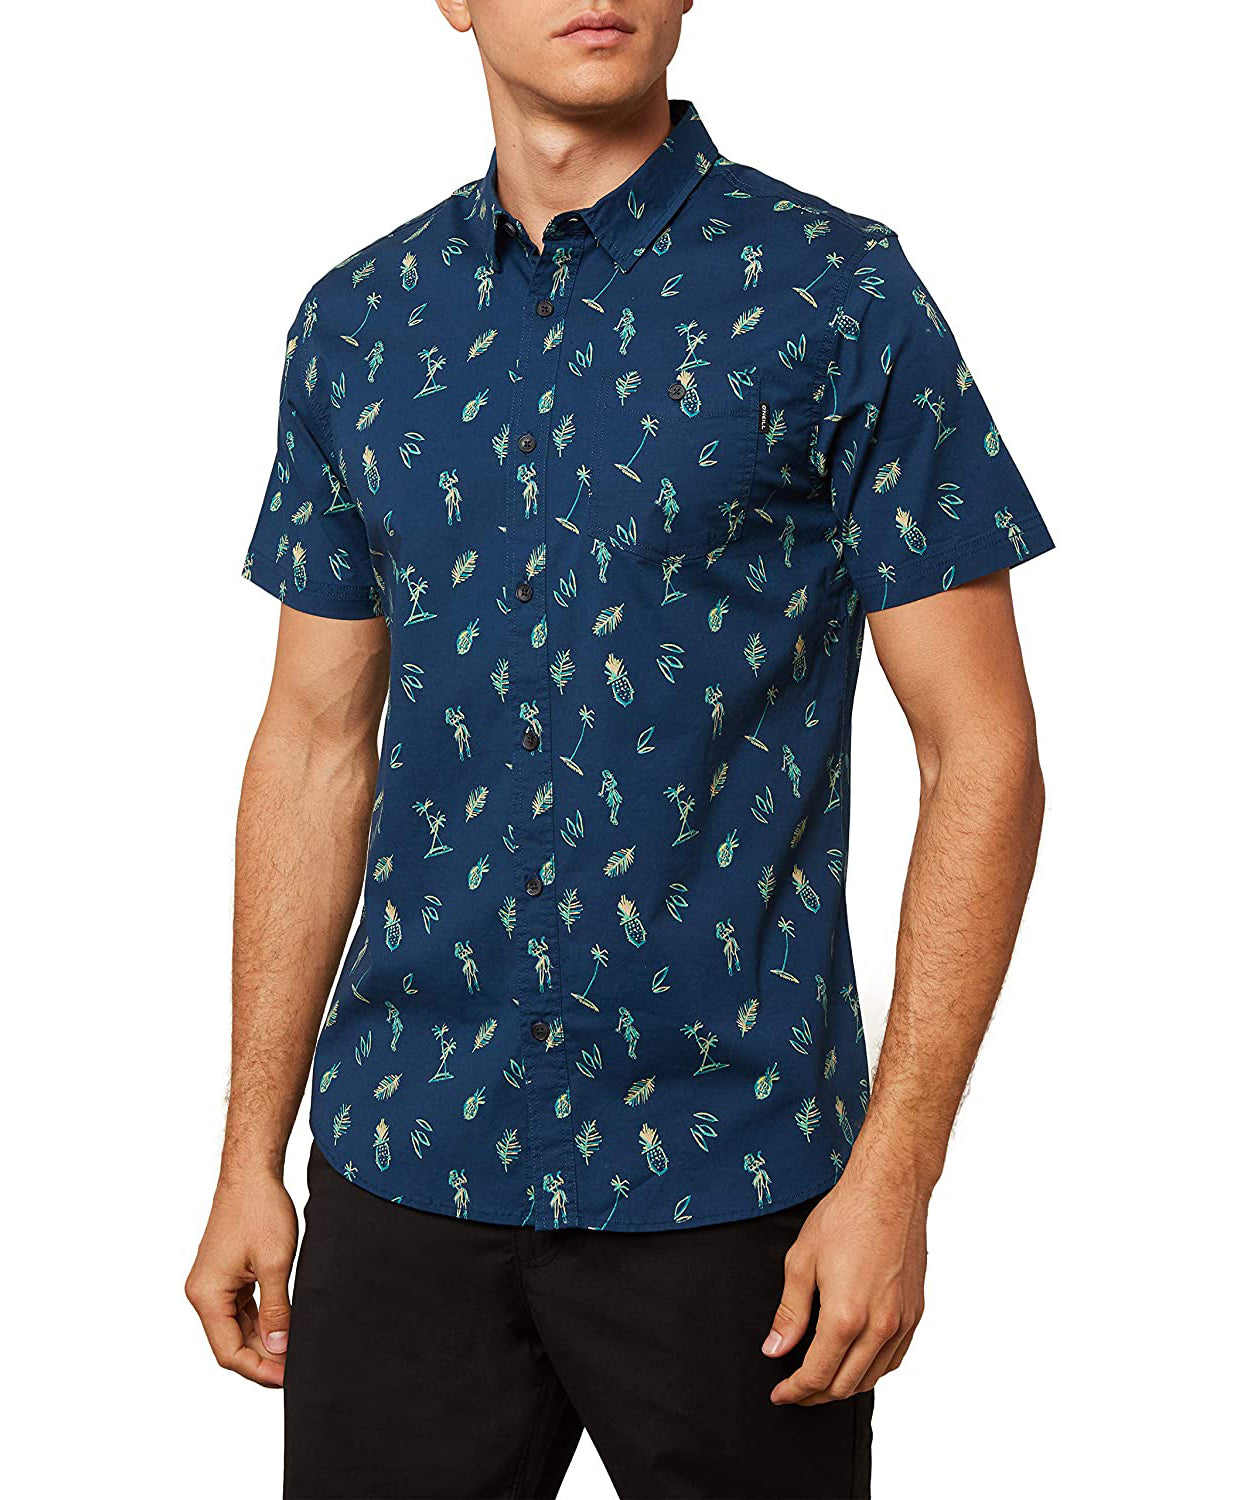 O'Neill Tame SS Mens Woven Tee Navy L